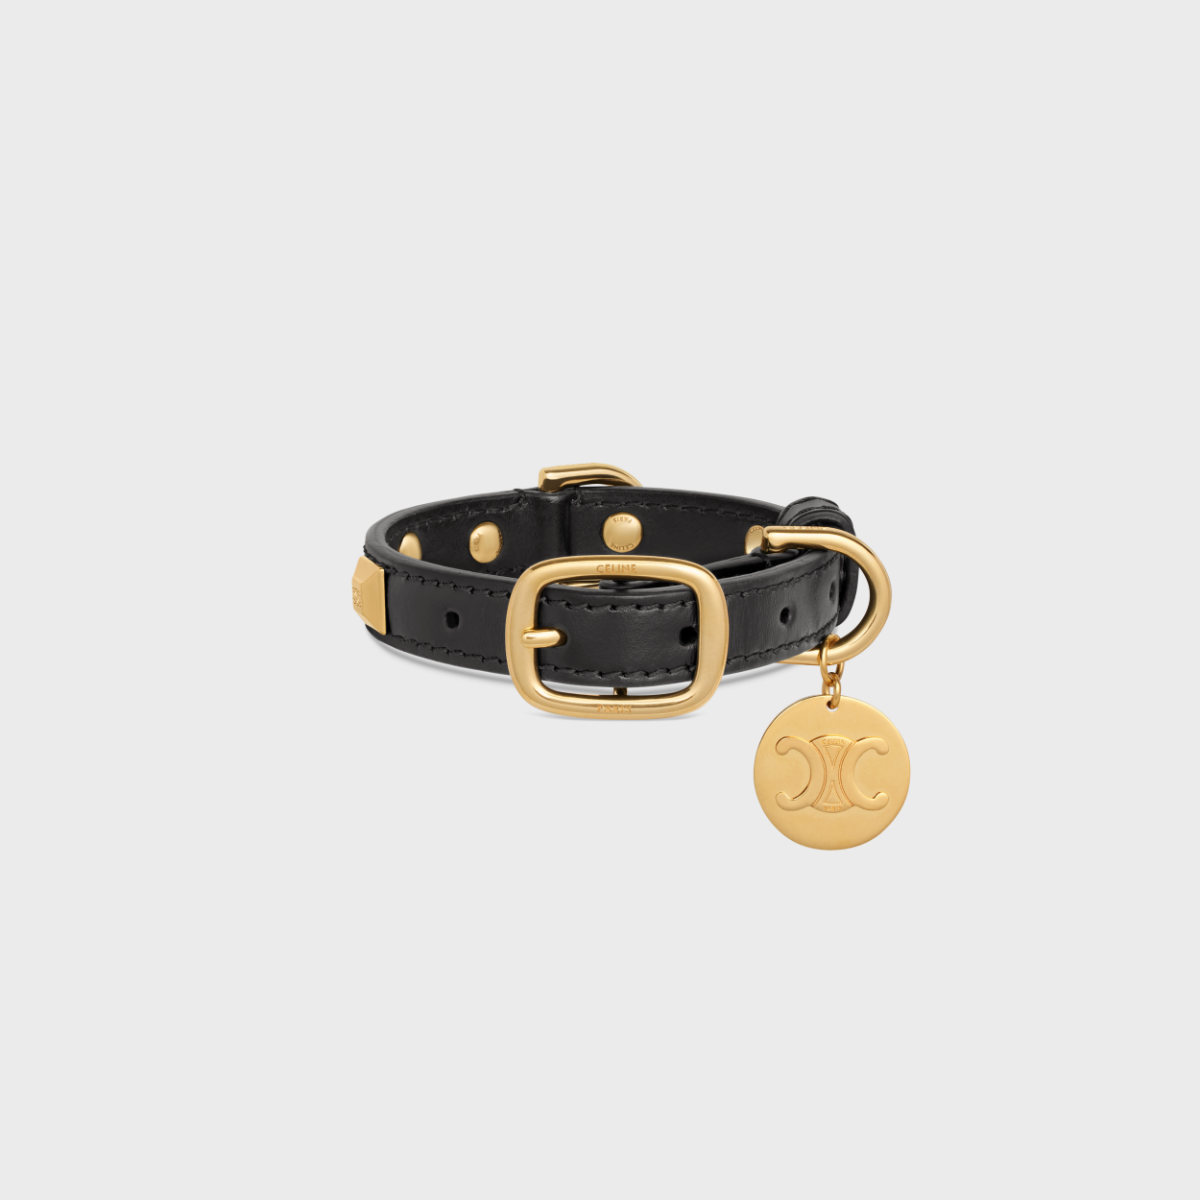 Celine Maison Launches Its New Dog Accessories Collection Campaign